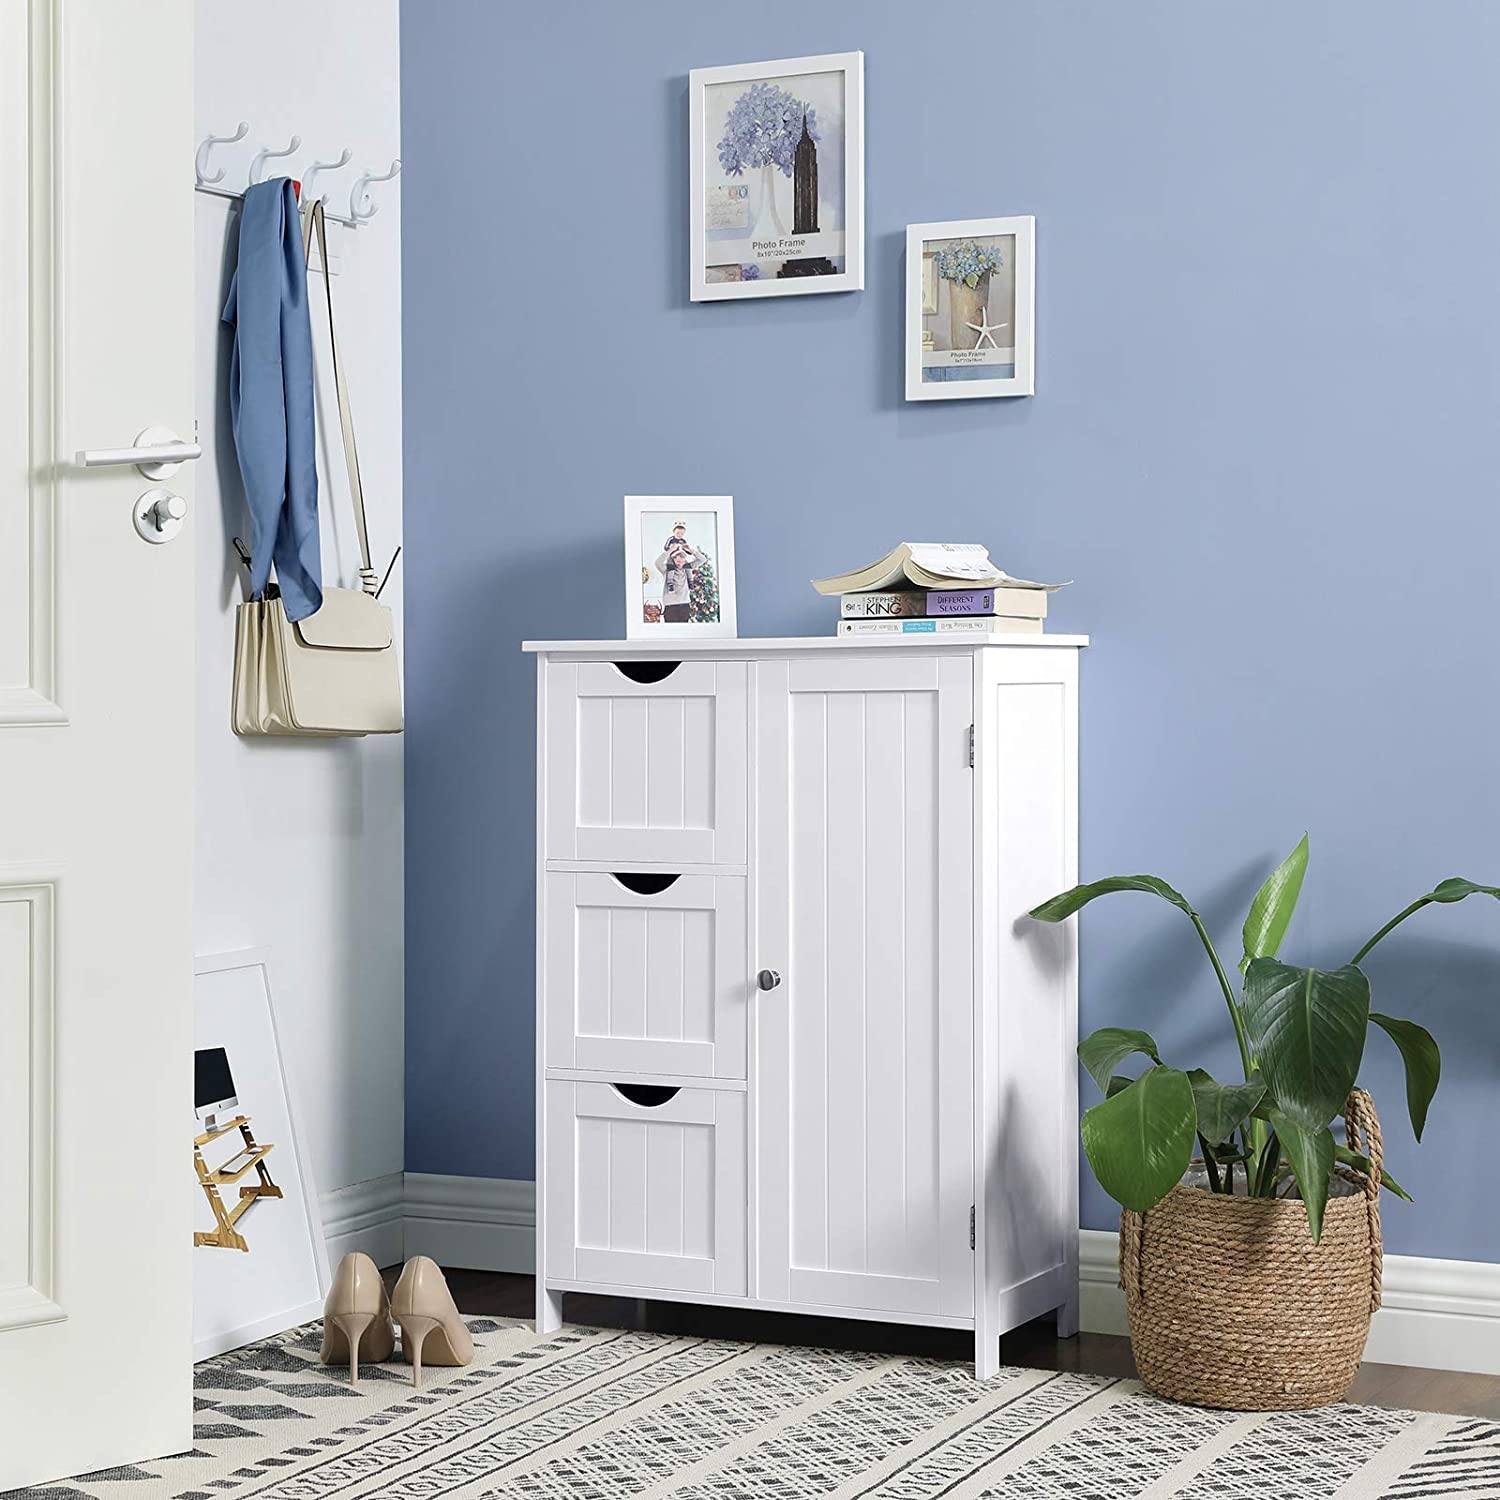 Bathroom Storage Cabinet, Floor Cabinet with 3 Large Drawers and 1 Adjustable Shelf, 60 x 30 x 81 cm, White BBC49WT RAW58.dk 